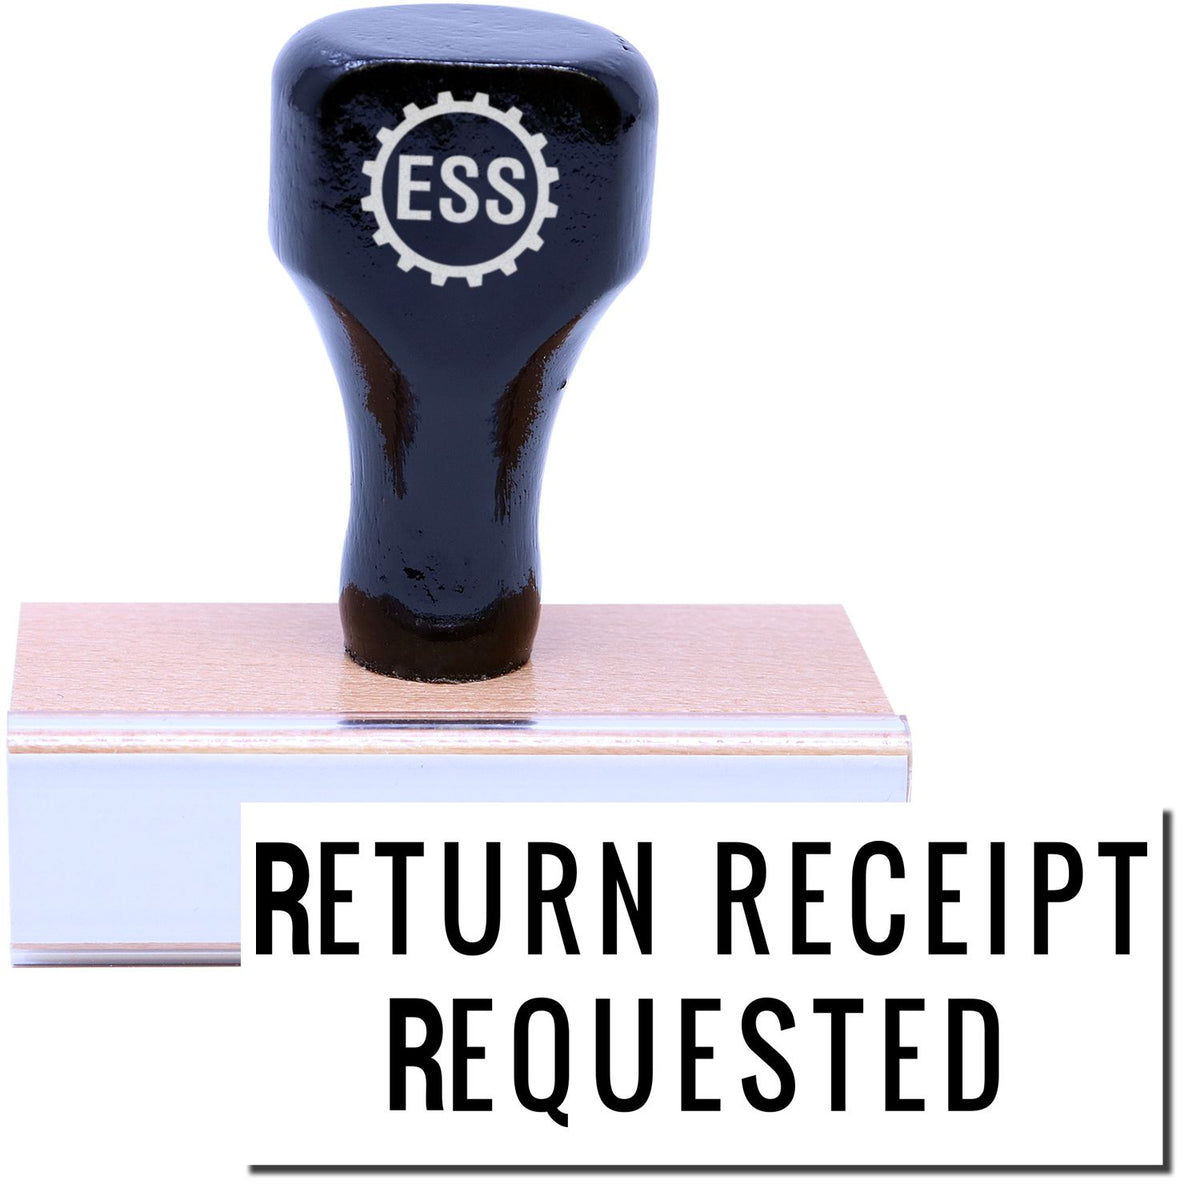 A stock office rubber stamp with a stamped image showing how the text &quot;RETURN RECEIPT REQUESTED&quot; in a large narrow font is displayed after stamping.